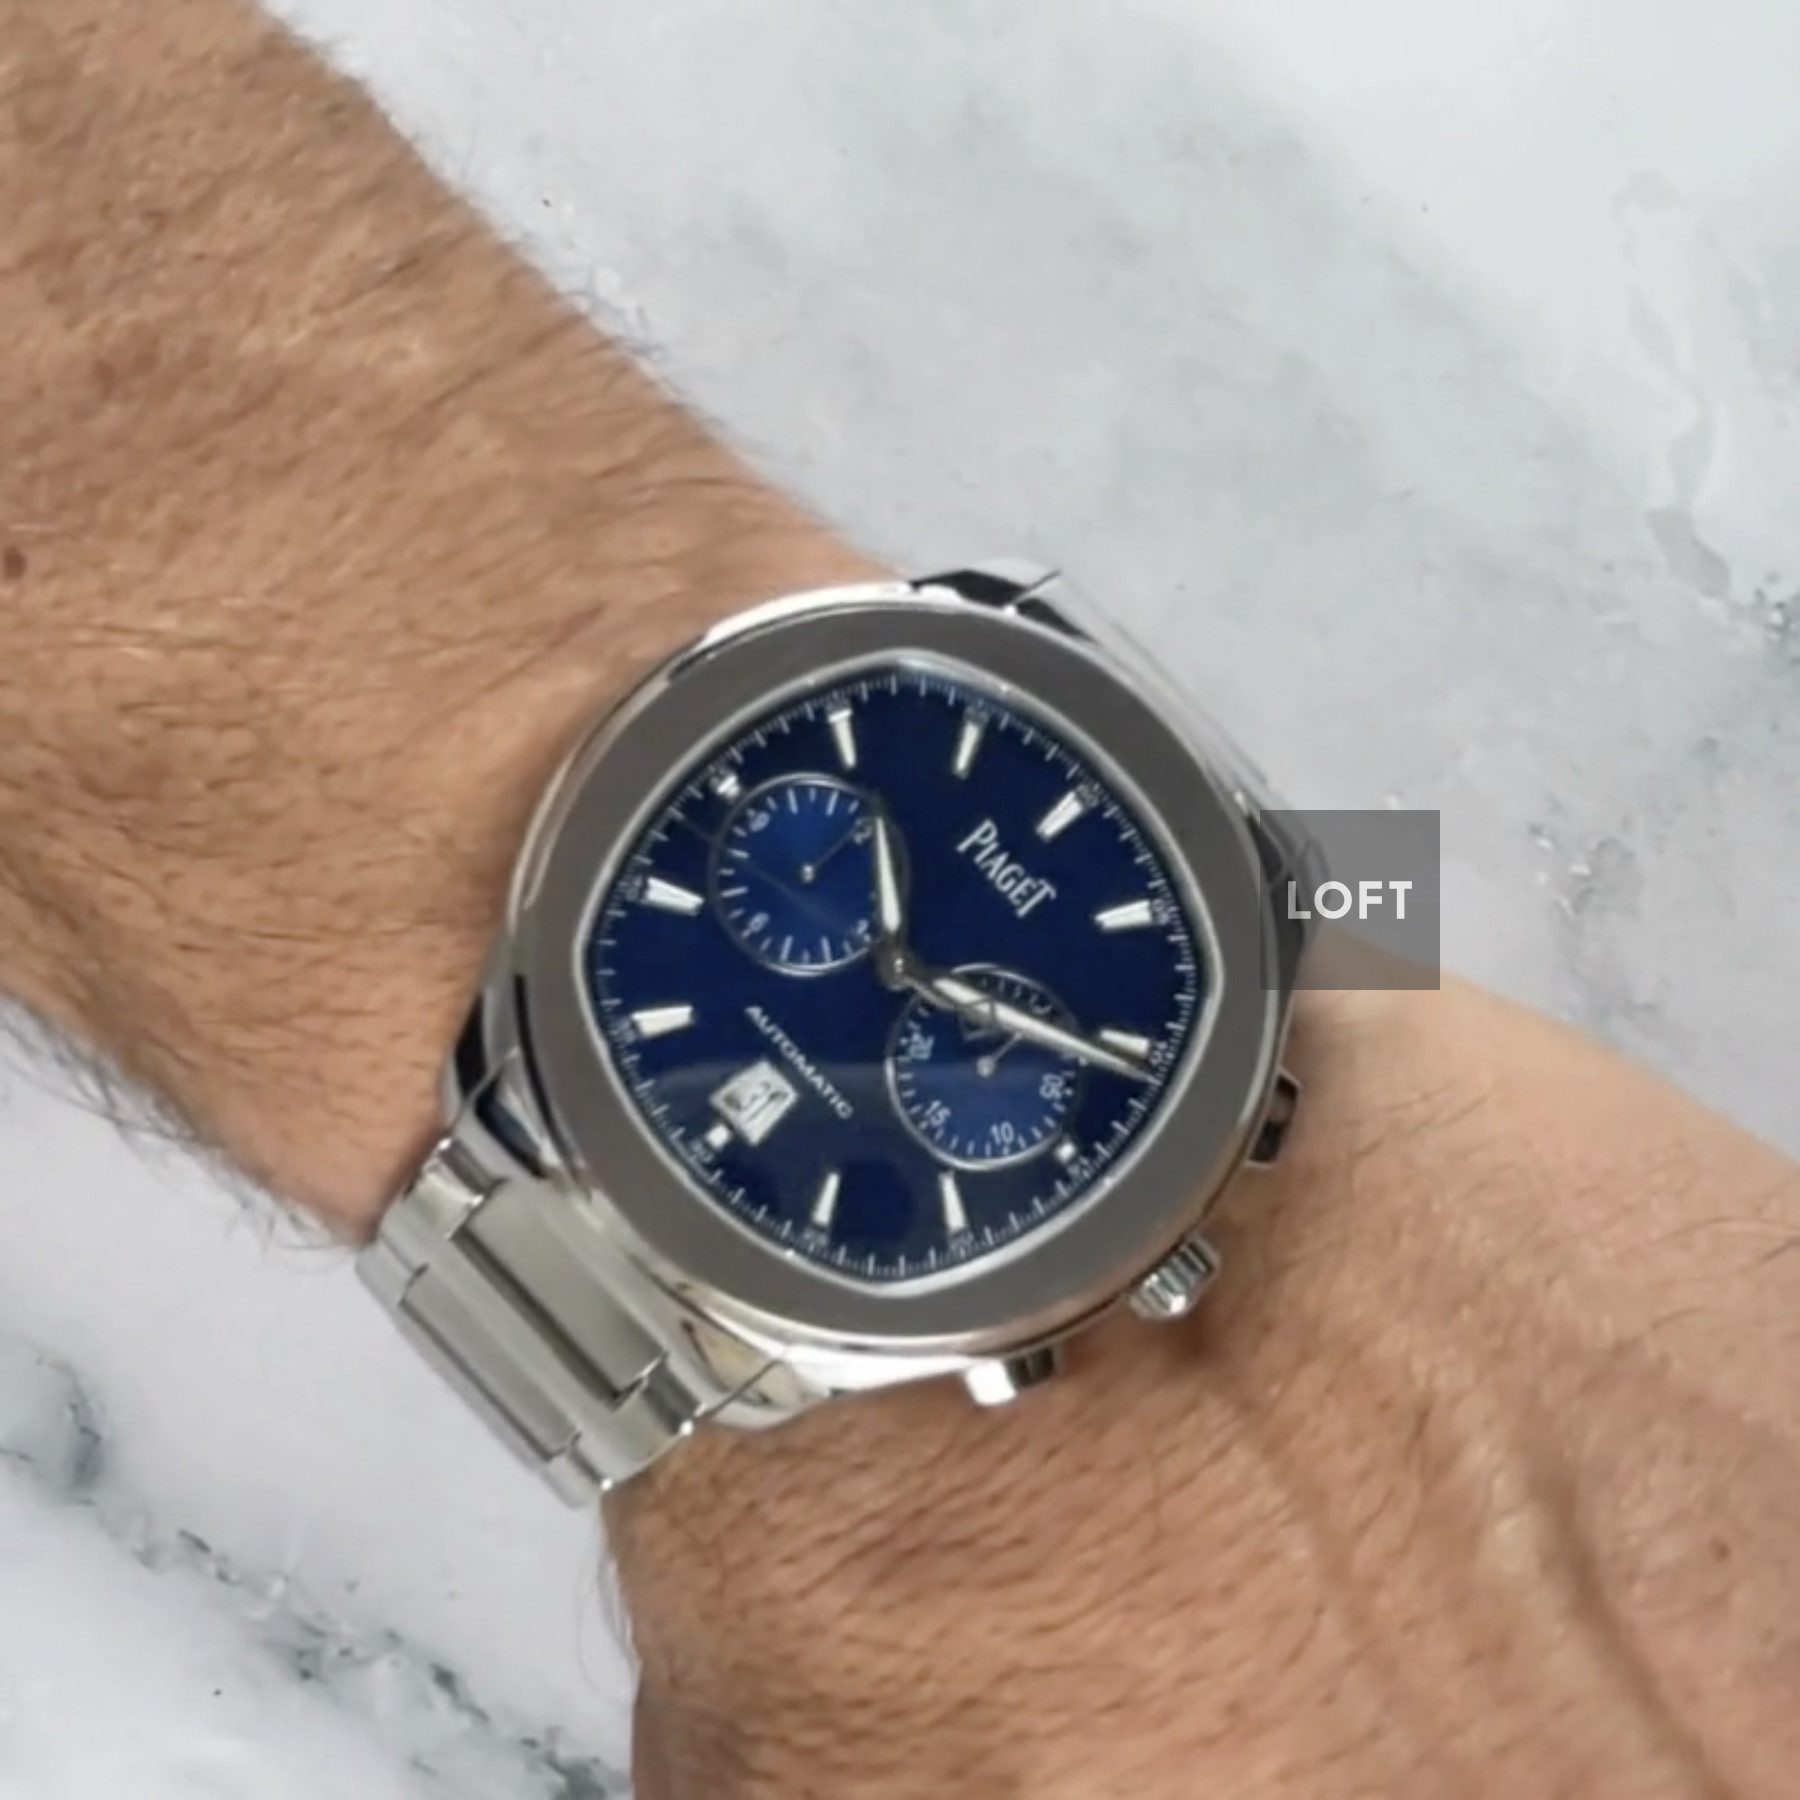 Piaget Polo S Automatic Chronograph Blue Dial 42 mm